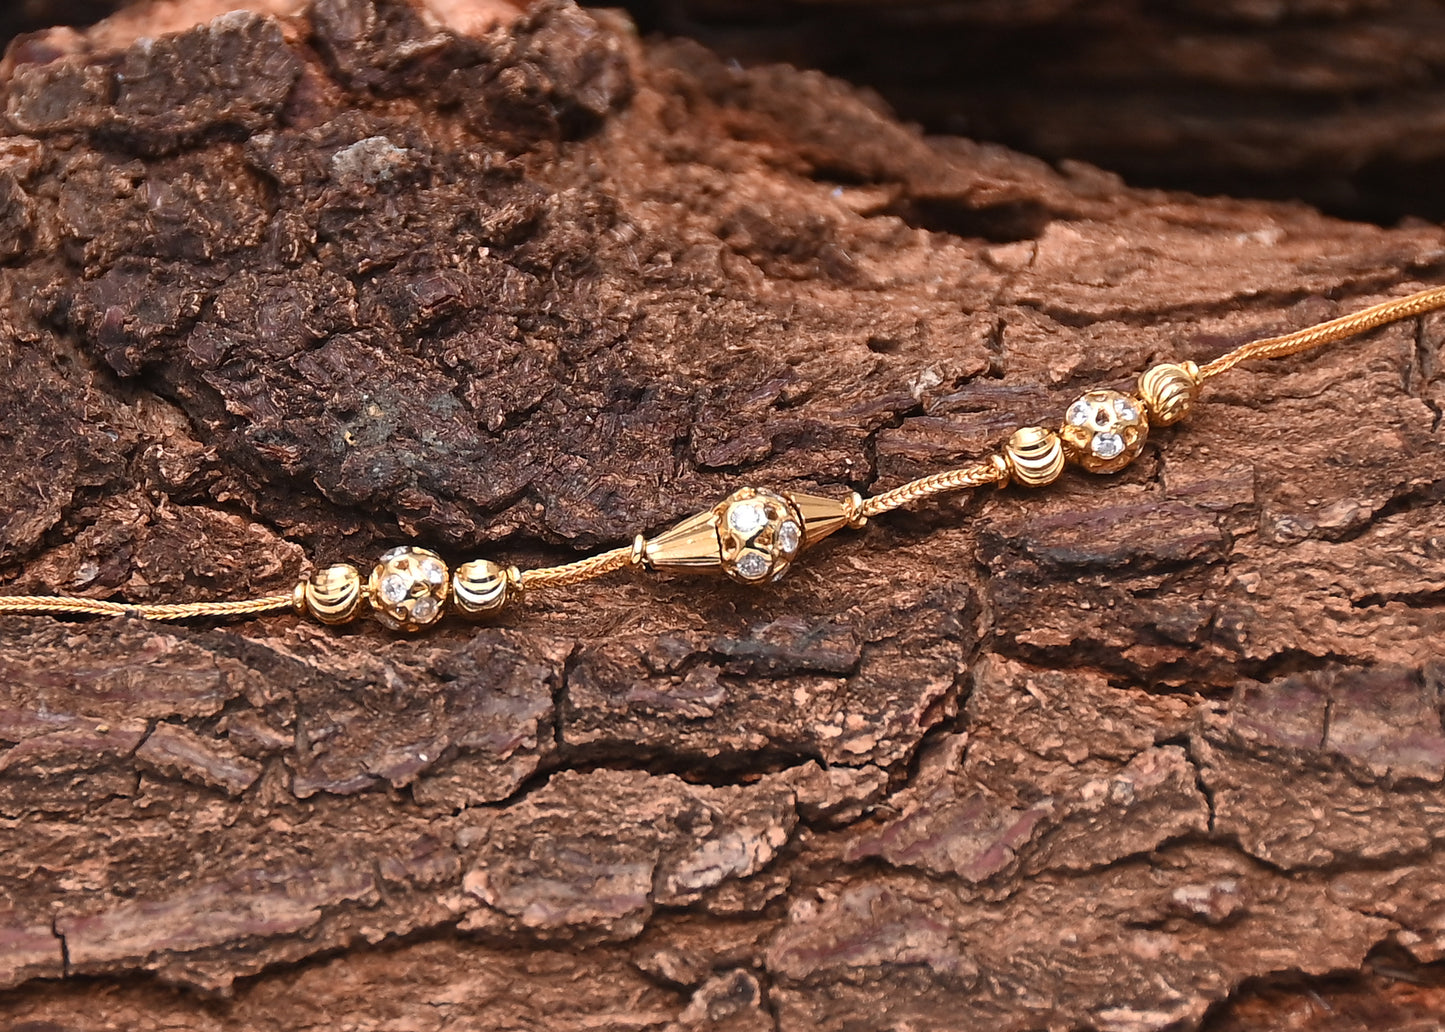 Dainsty Trio Bracelet Gold Plated (925 Sterling Silver)